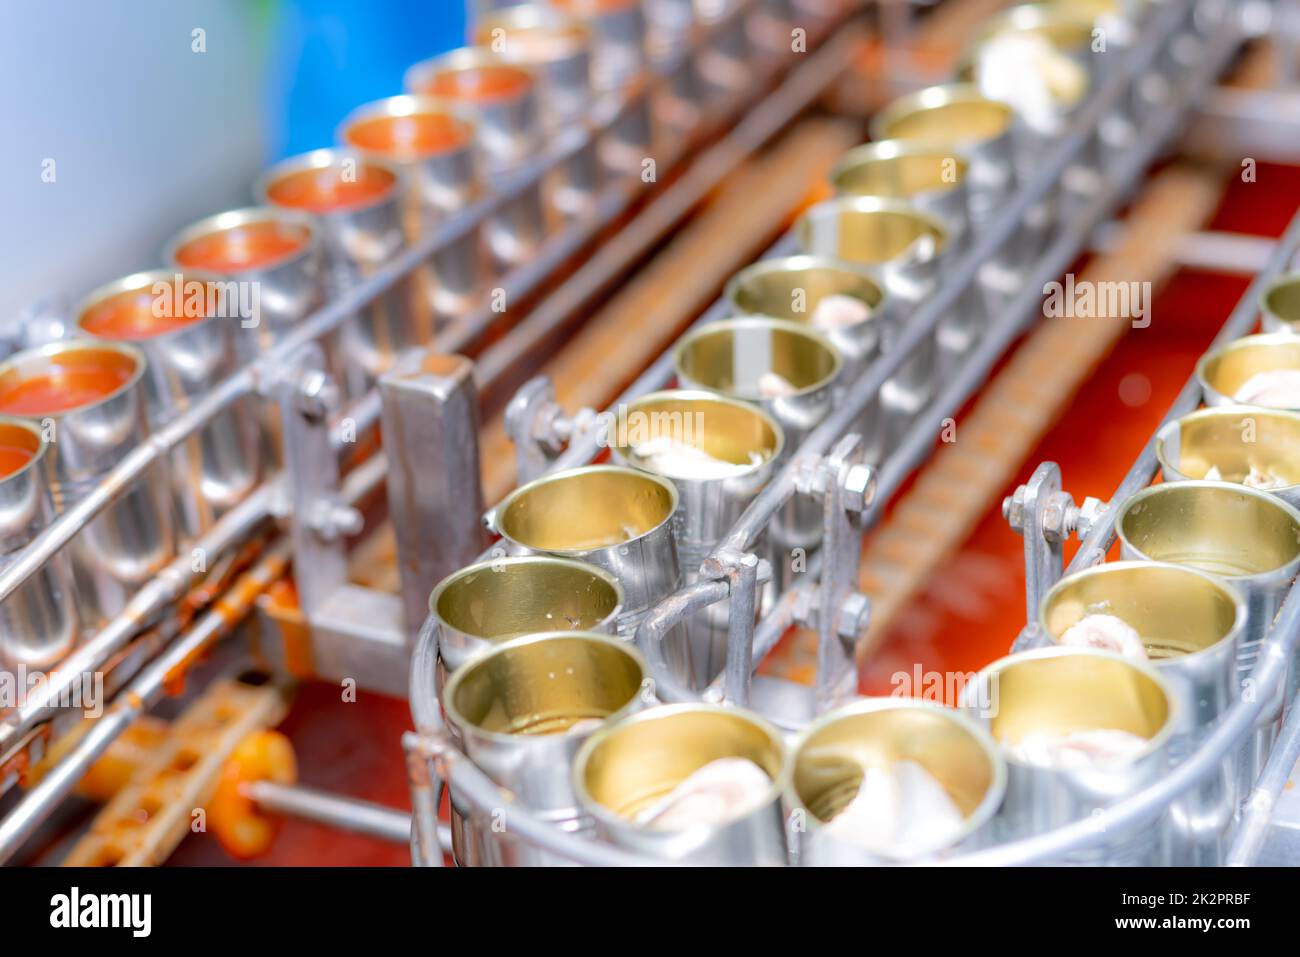 Canned fish factory. Food industry.  Sardines in red tomato sauce in tinned cans at food factory. Food processing production line. Food manufacturing industry. Many cans of sardine on a conveyor belt. Stock Photo